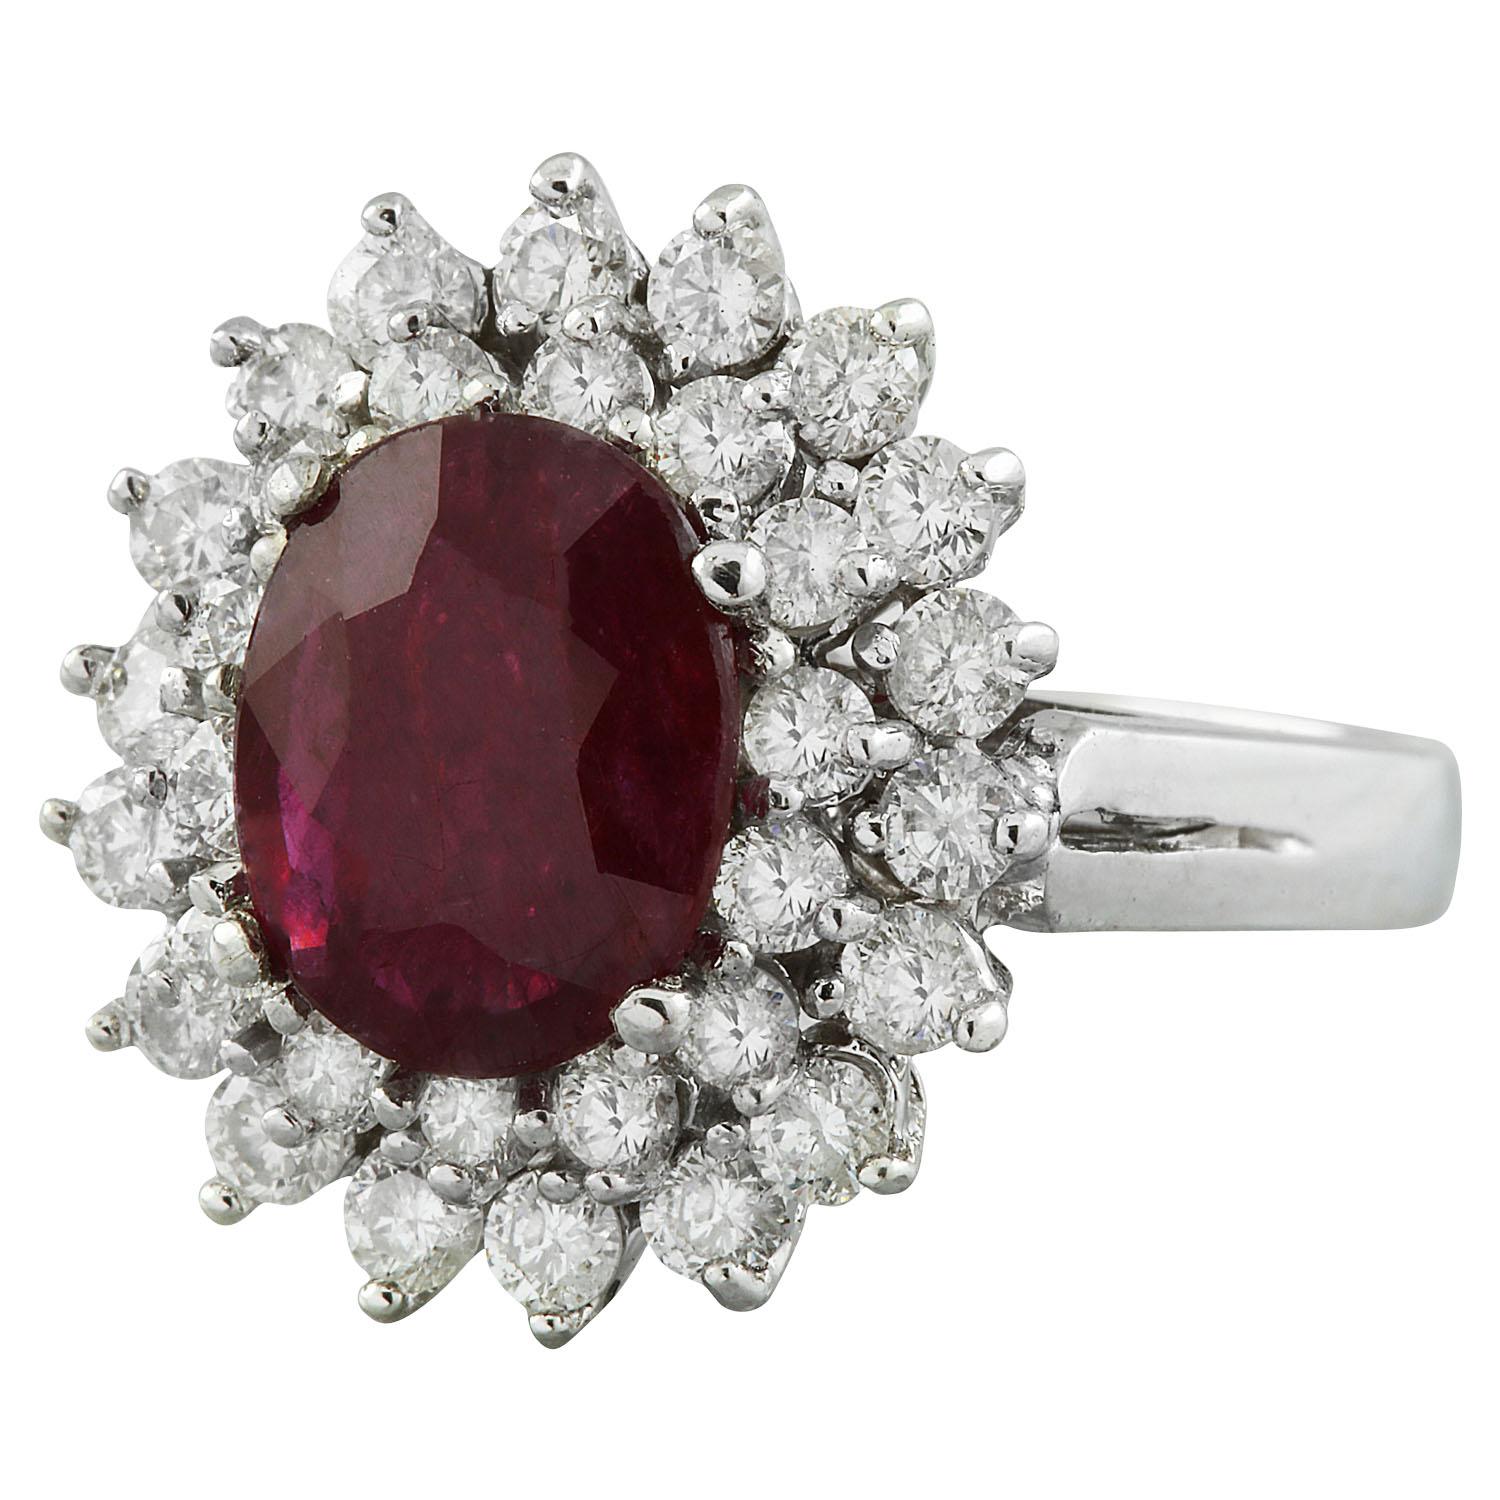 3.54 Carat Natural Ruby 14 Karat Solid White Gold Diamond Ring
Stamped: 14K
Total Ring Weight: 6.4 Grams 
Ruby Weight: 2.34 Carat (10.00x8.00 Millimeters) 
Diamond Weight: 1.20 carat (F-G Color, VS2-SI1 Clarity )
Quantity: 32
Face Measures: